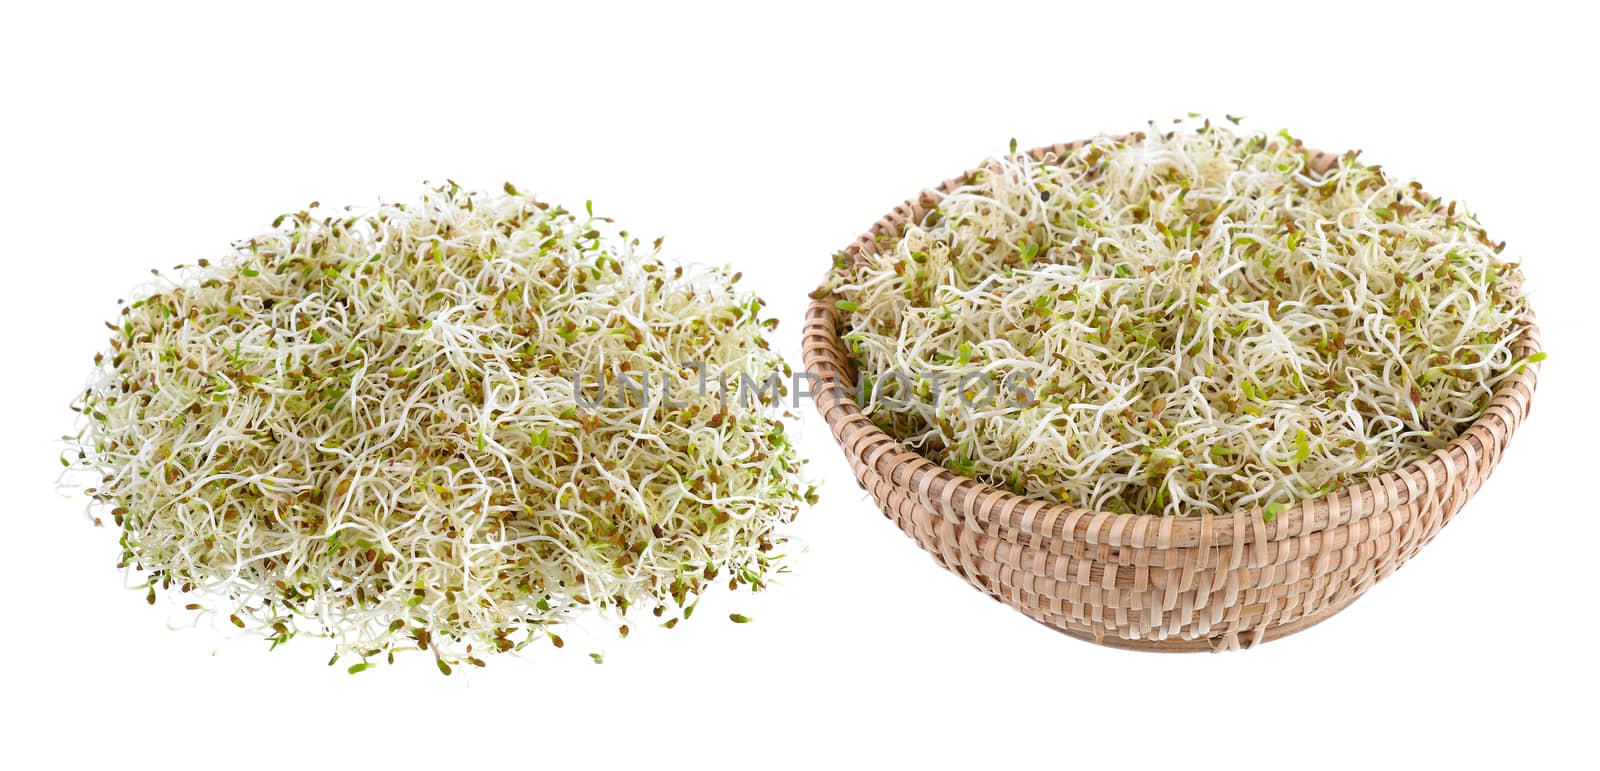 Sprouted alfalfa seeds on a white background by sommai